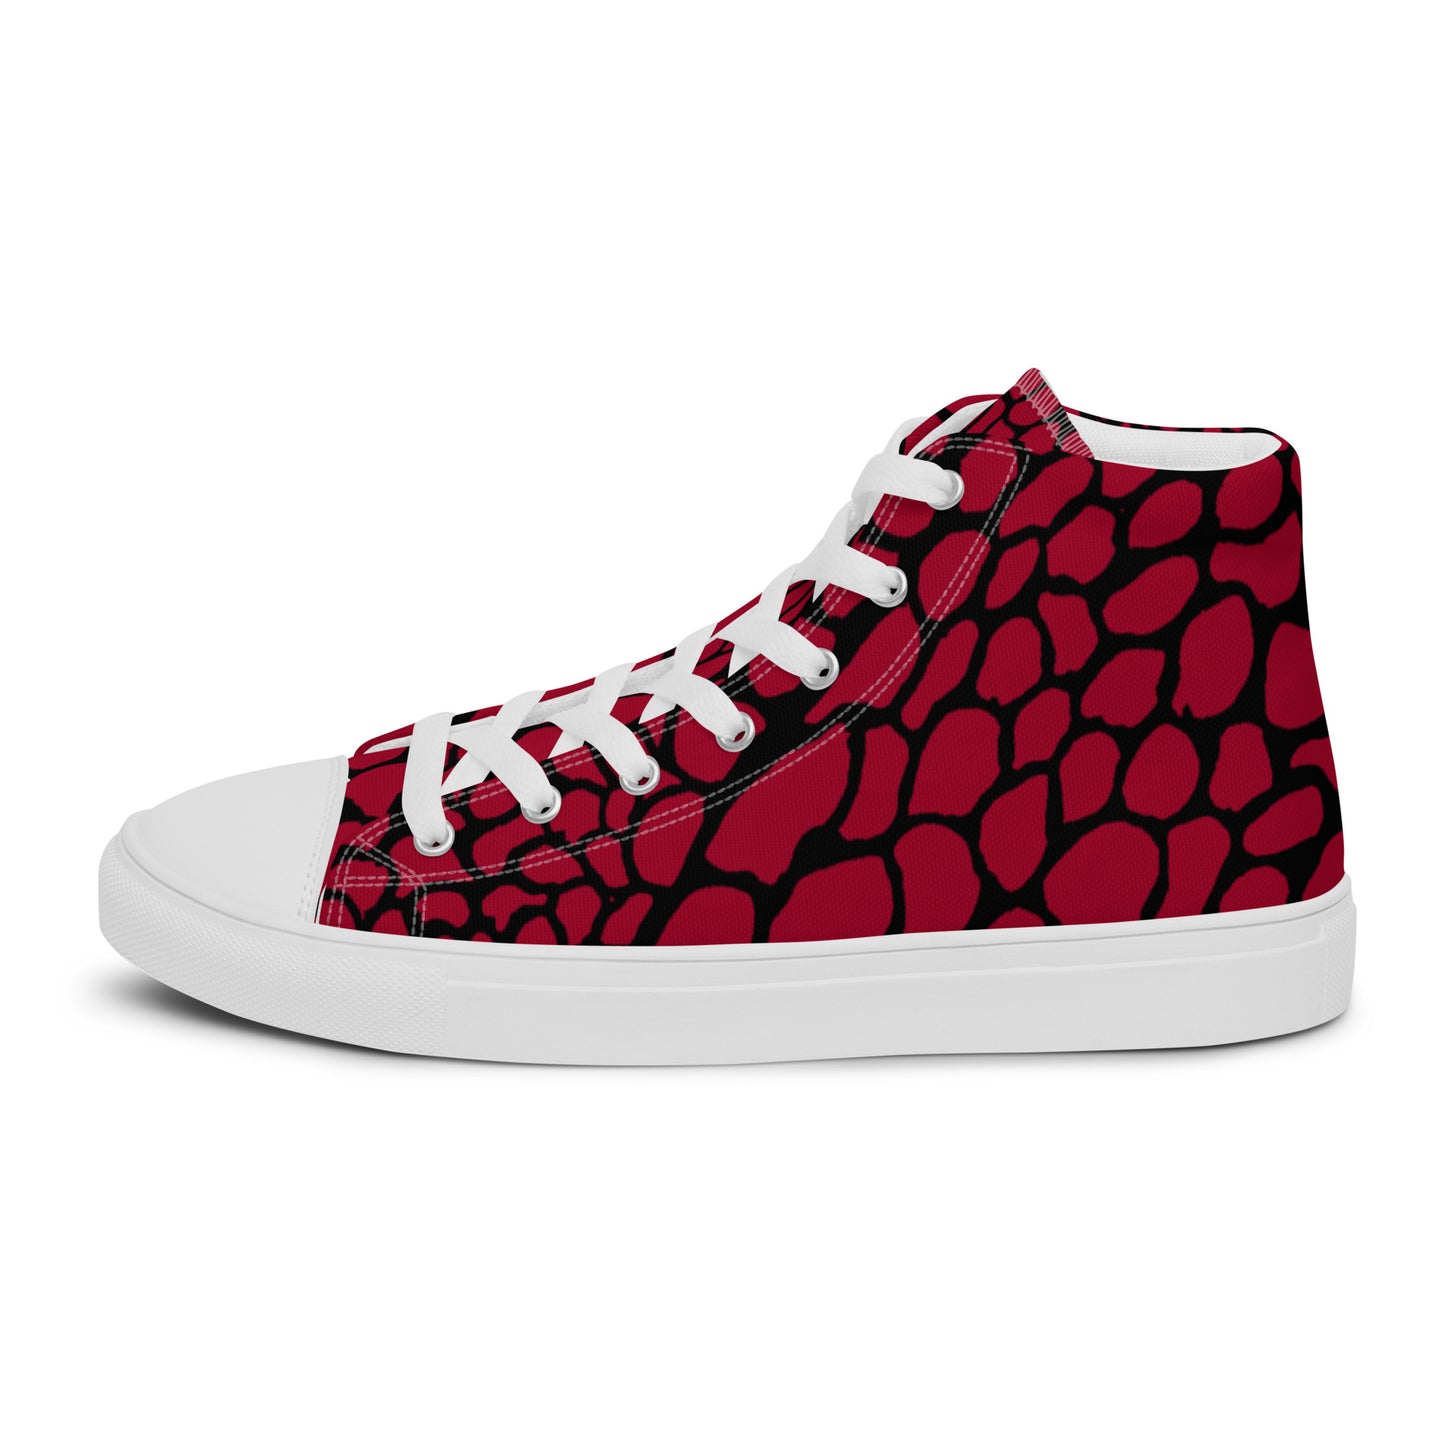 Organic Blood Red Men’s High Top Canvas Shoes | Casual Print Shoes | Stylish Festival Sneakers | Abstract Shoes | Lace Up Sneakers | - Comfortable Culture - Shoes - Comfortable Culture